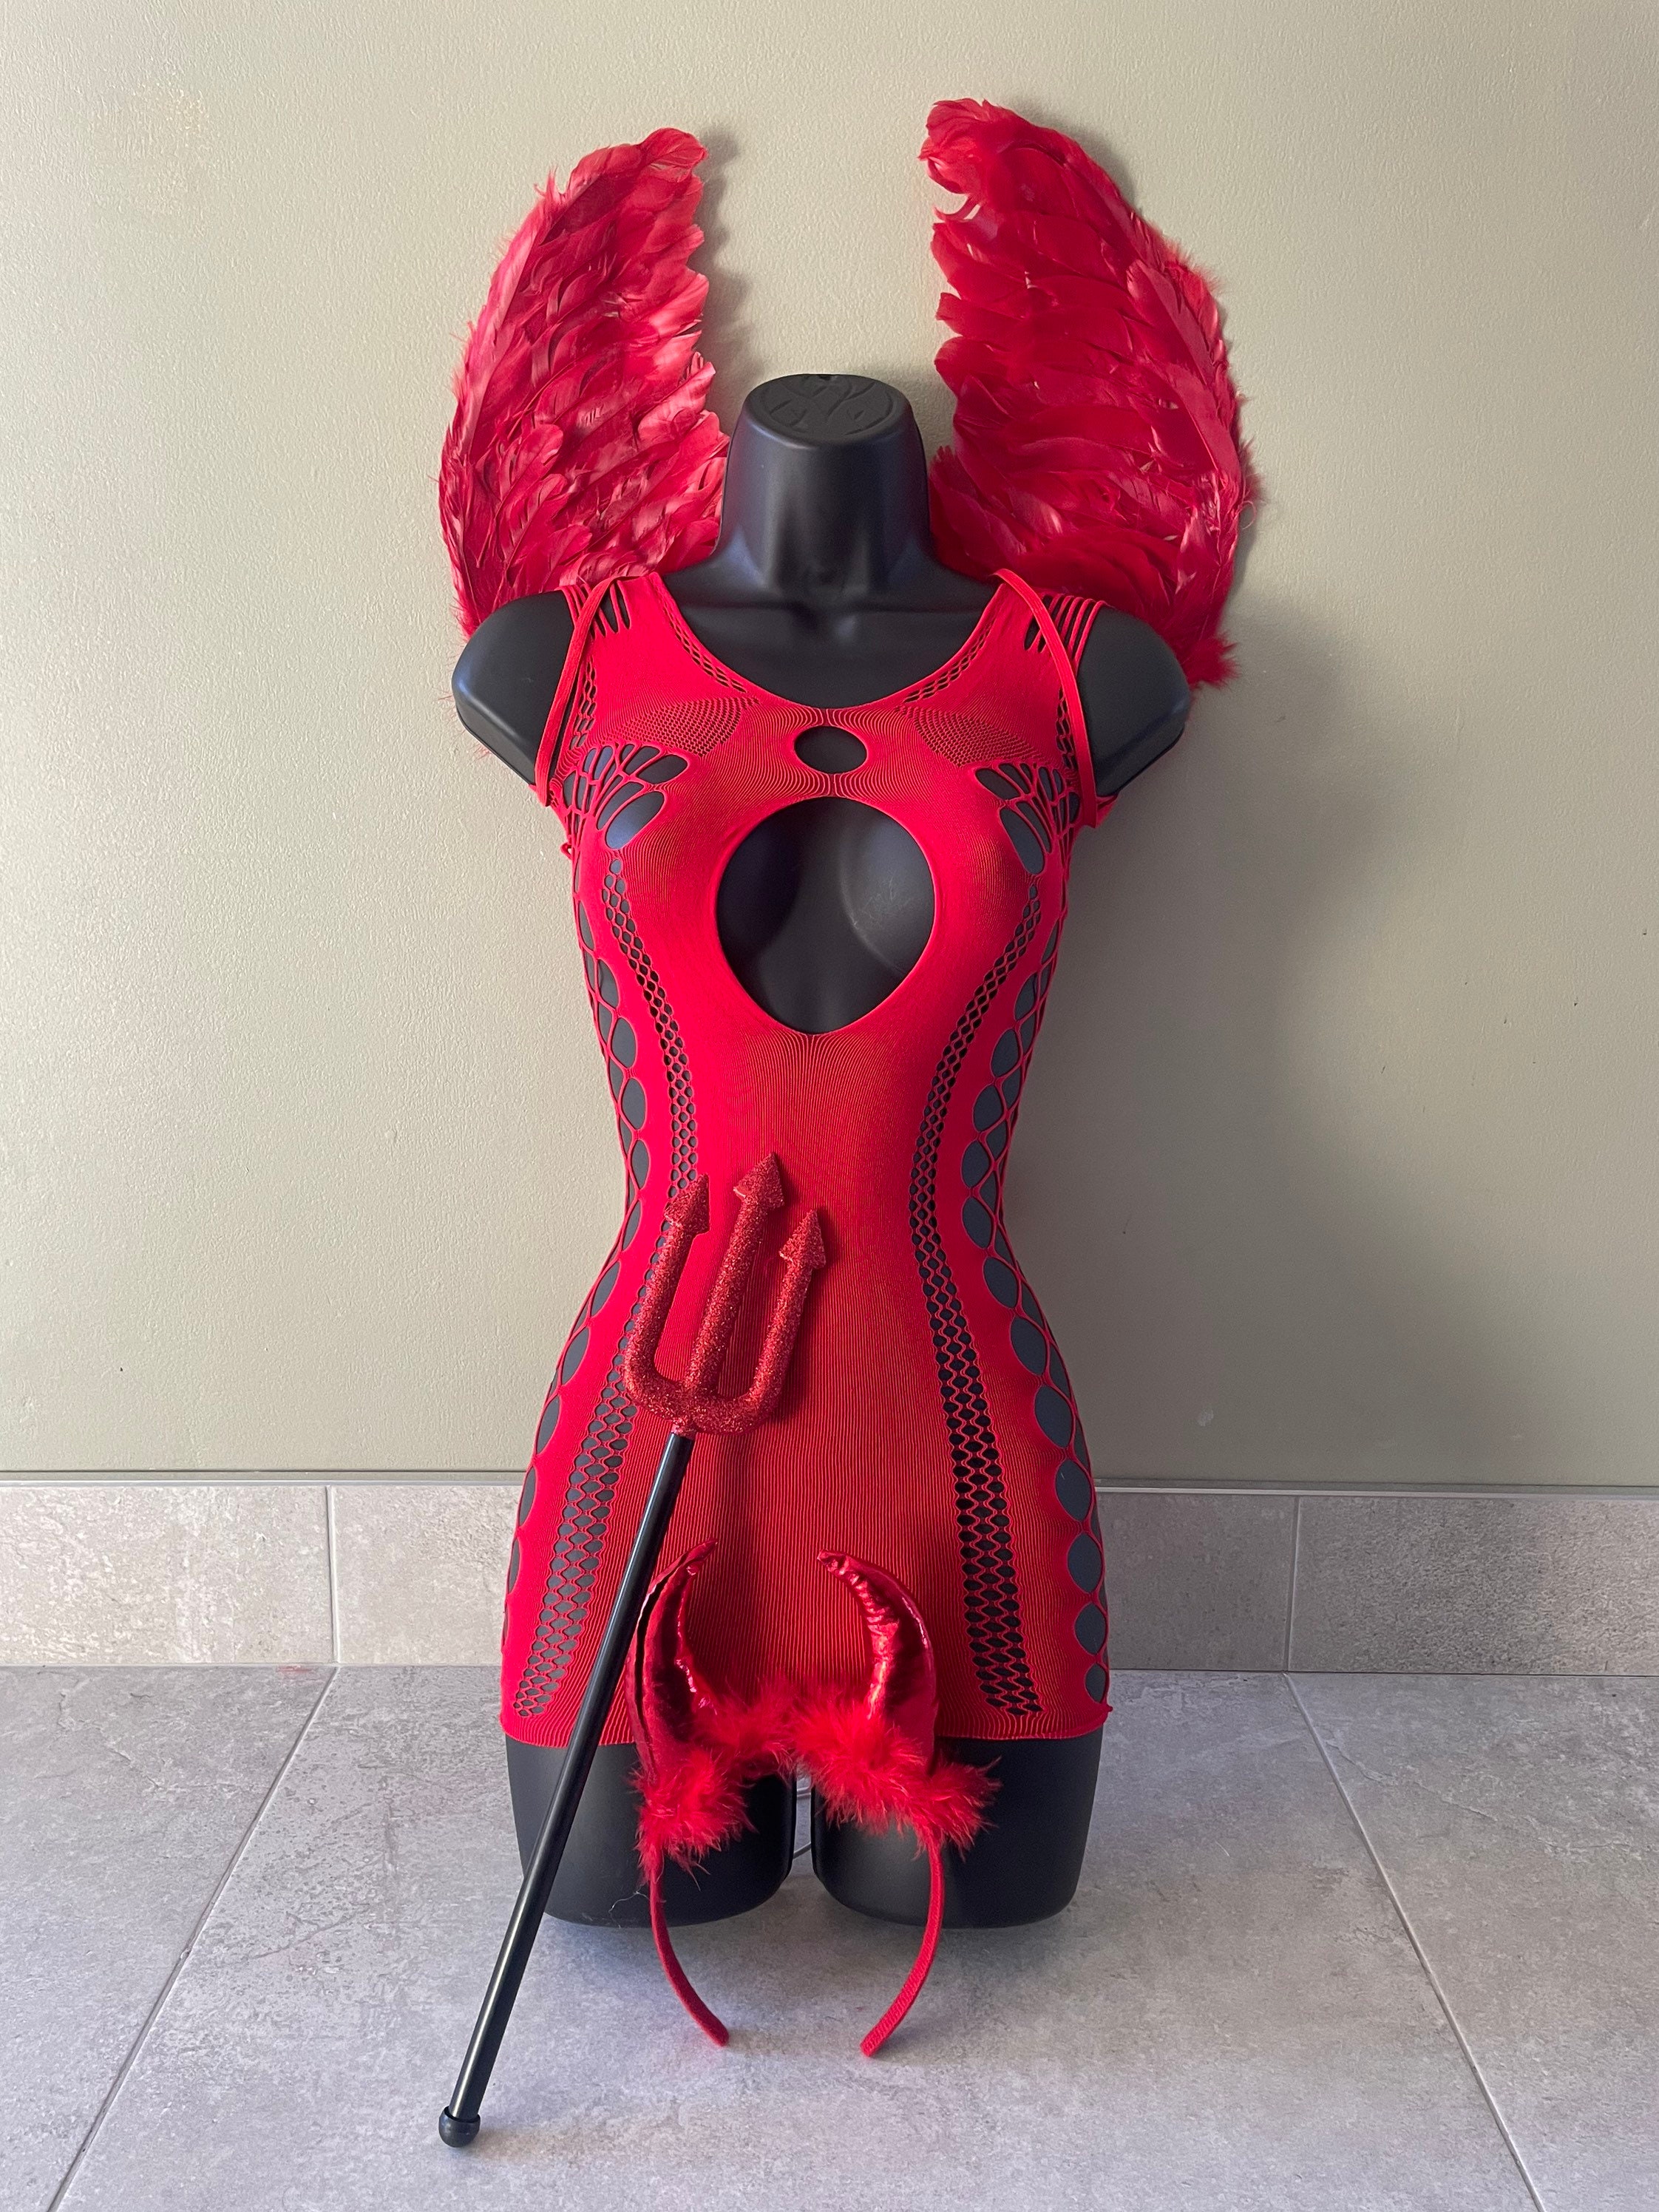 home made devil costumes for adults Xxx Pics Hd